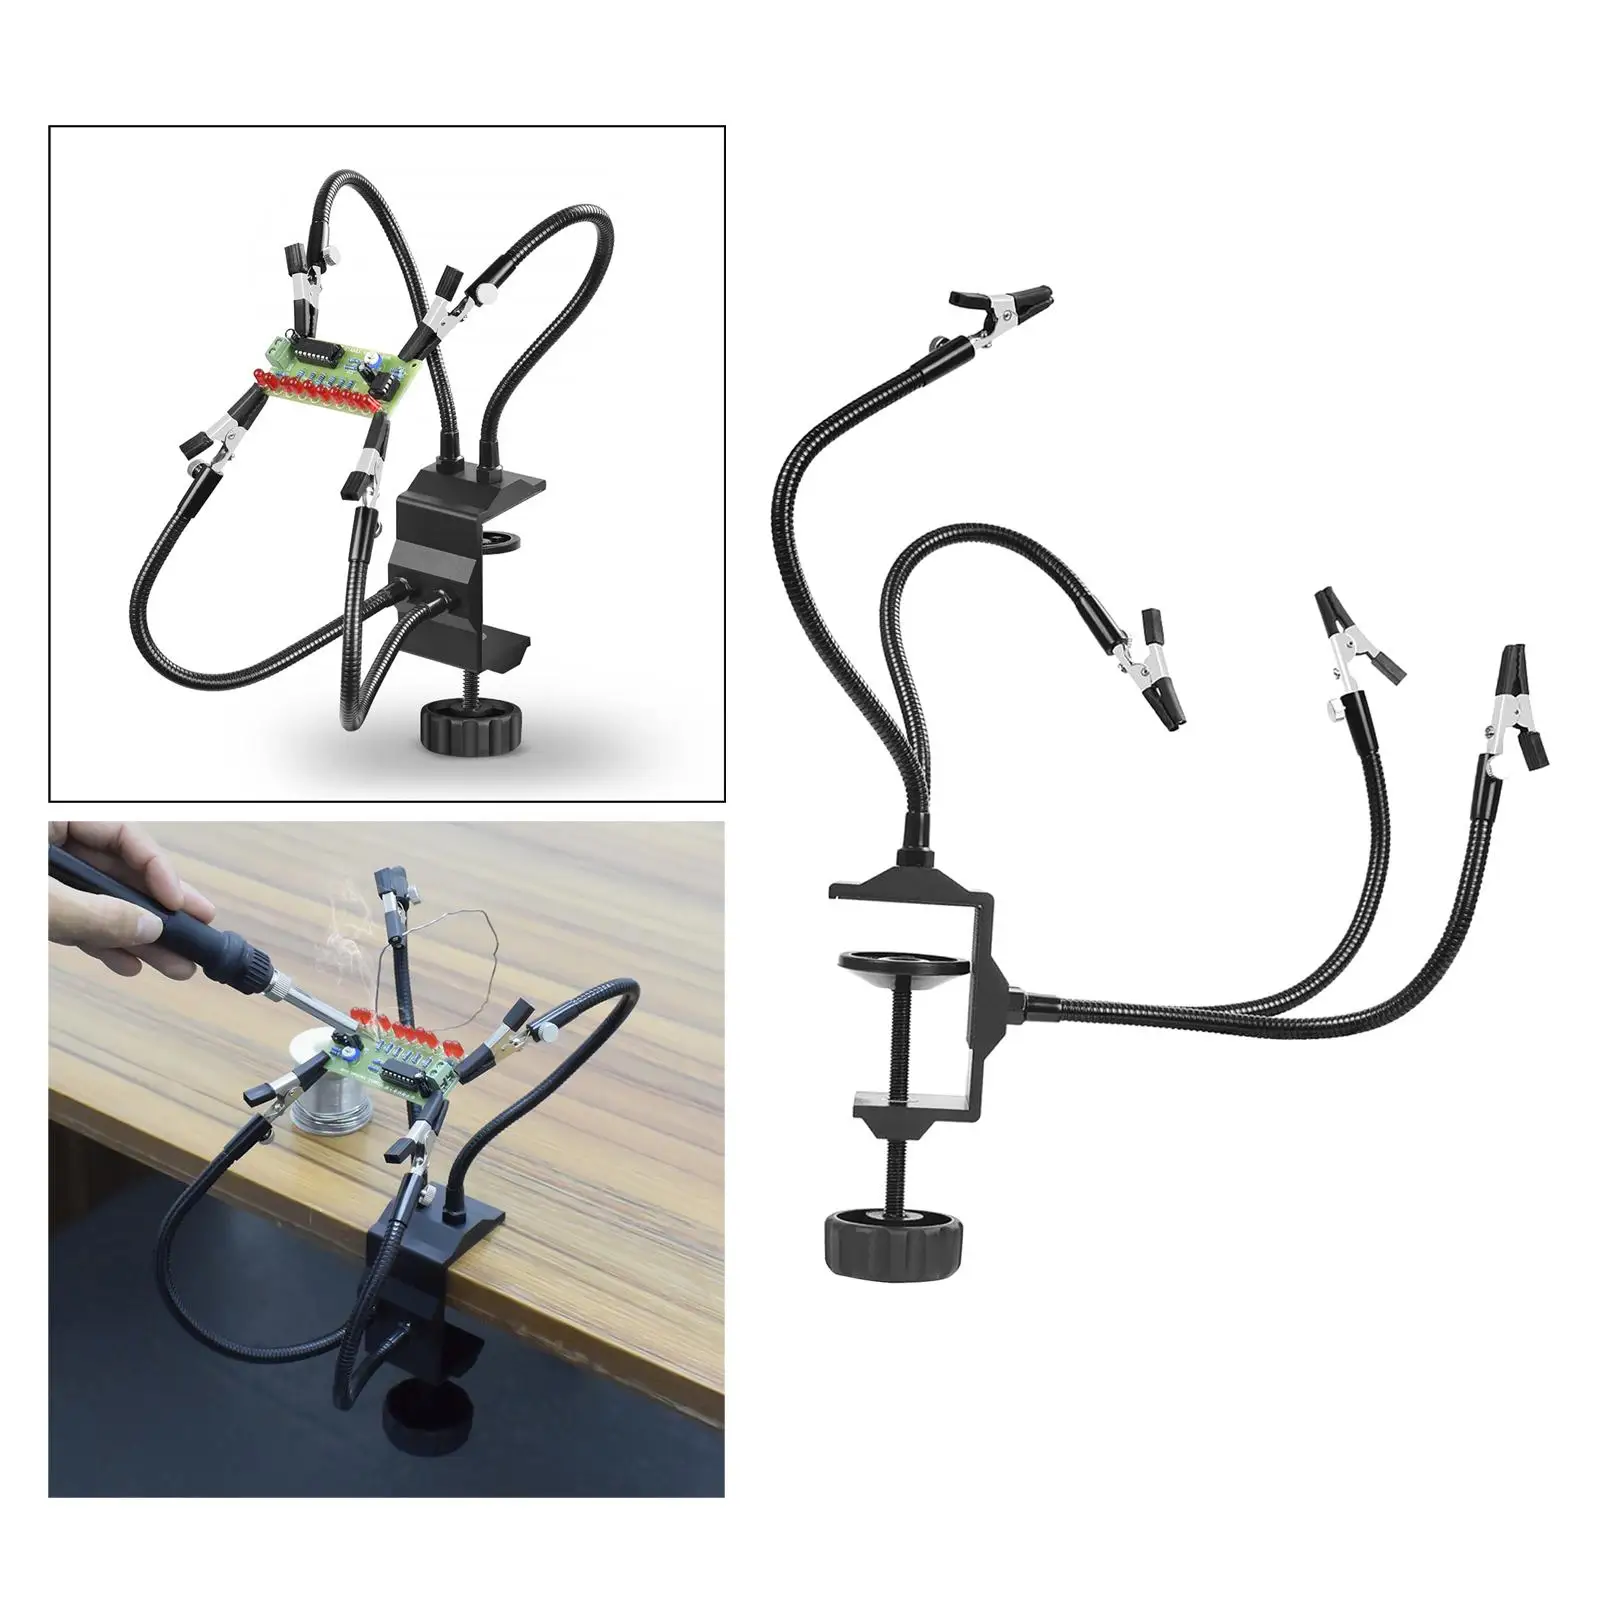 Soldering Helping Hands Stable Desk Clamp Base for Arts Craft Painting Hobby